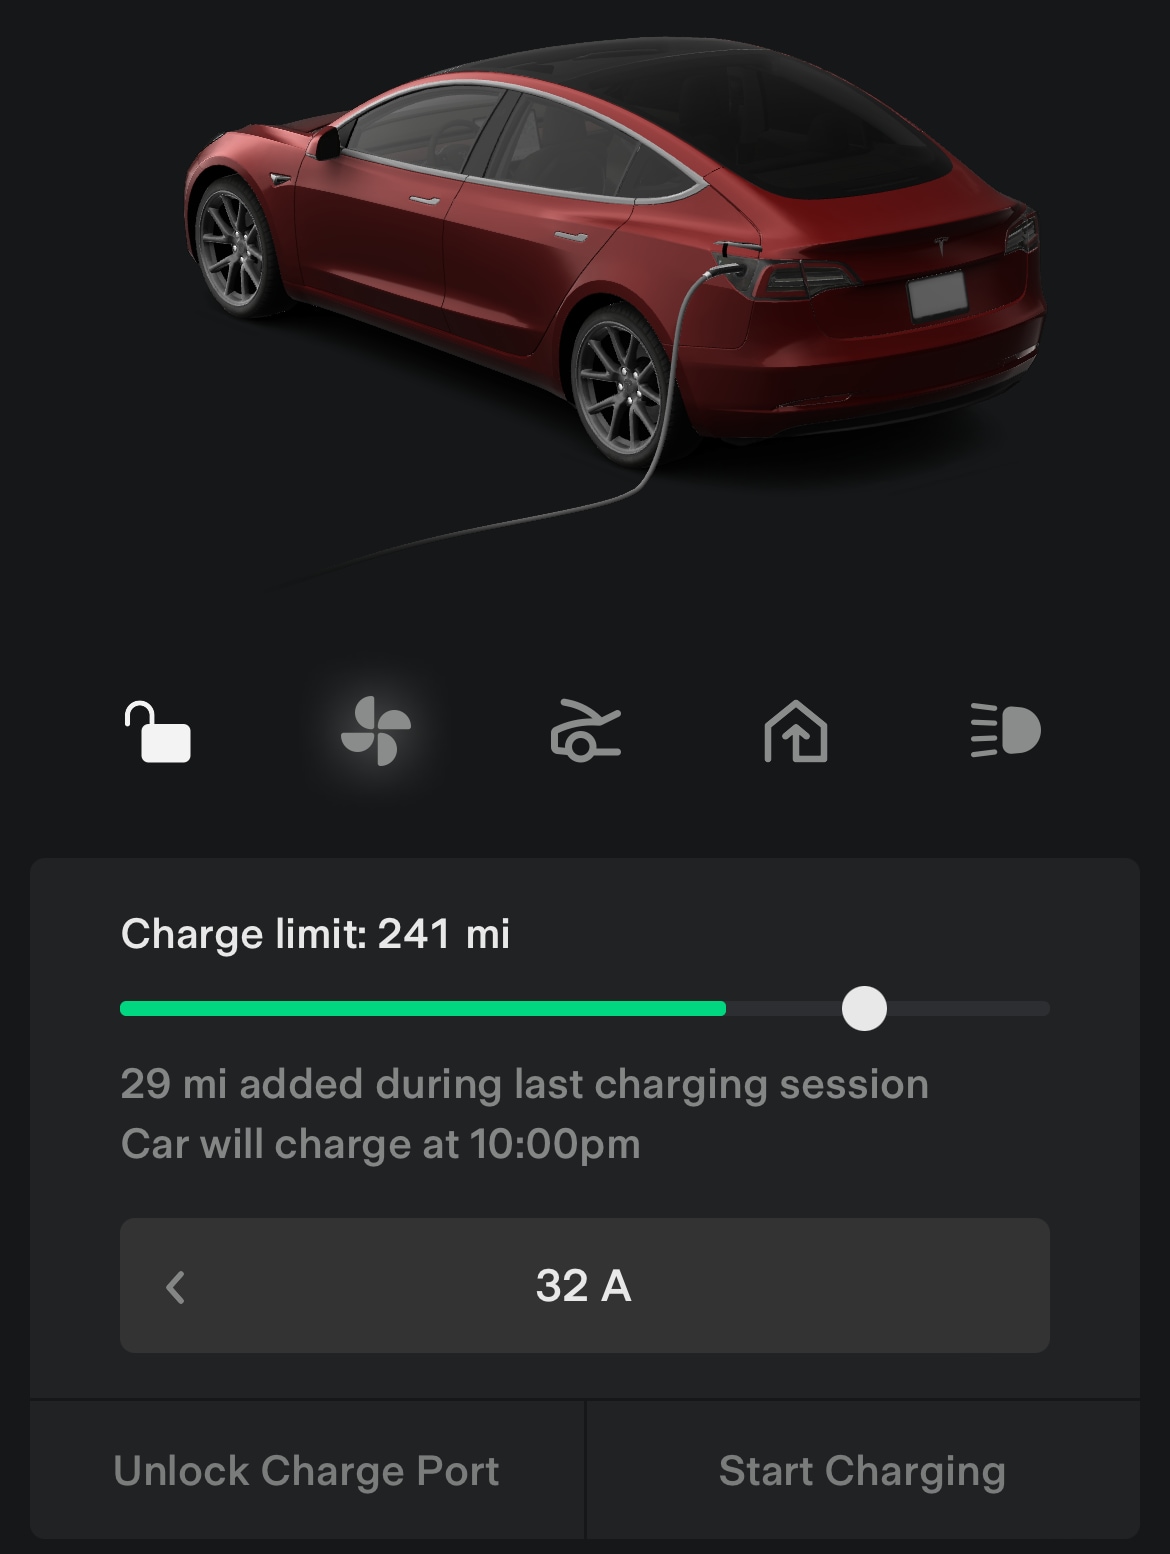 Tesla Next Charge feature in update 4.4